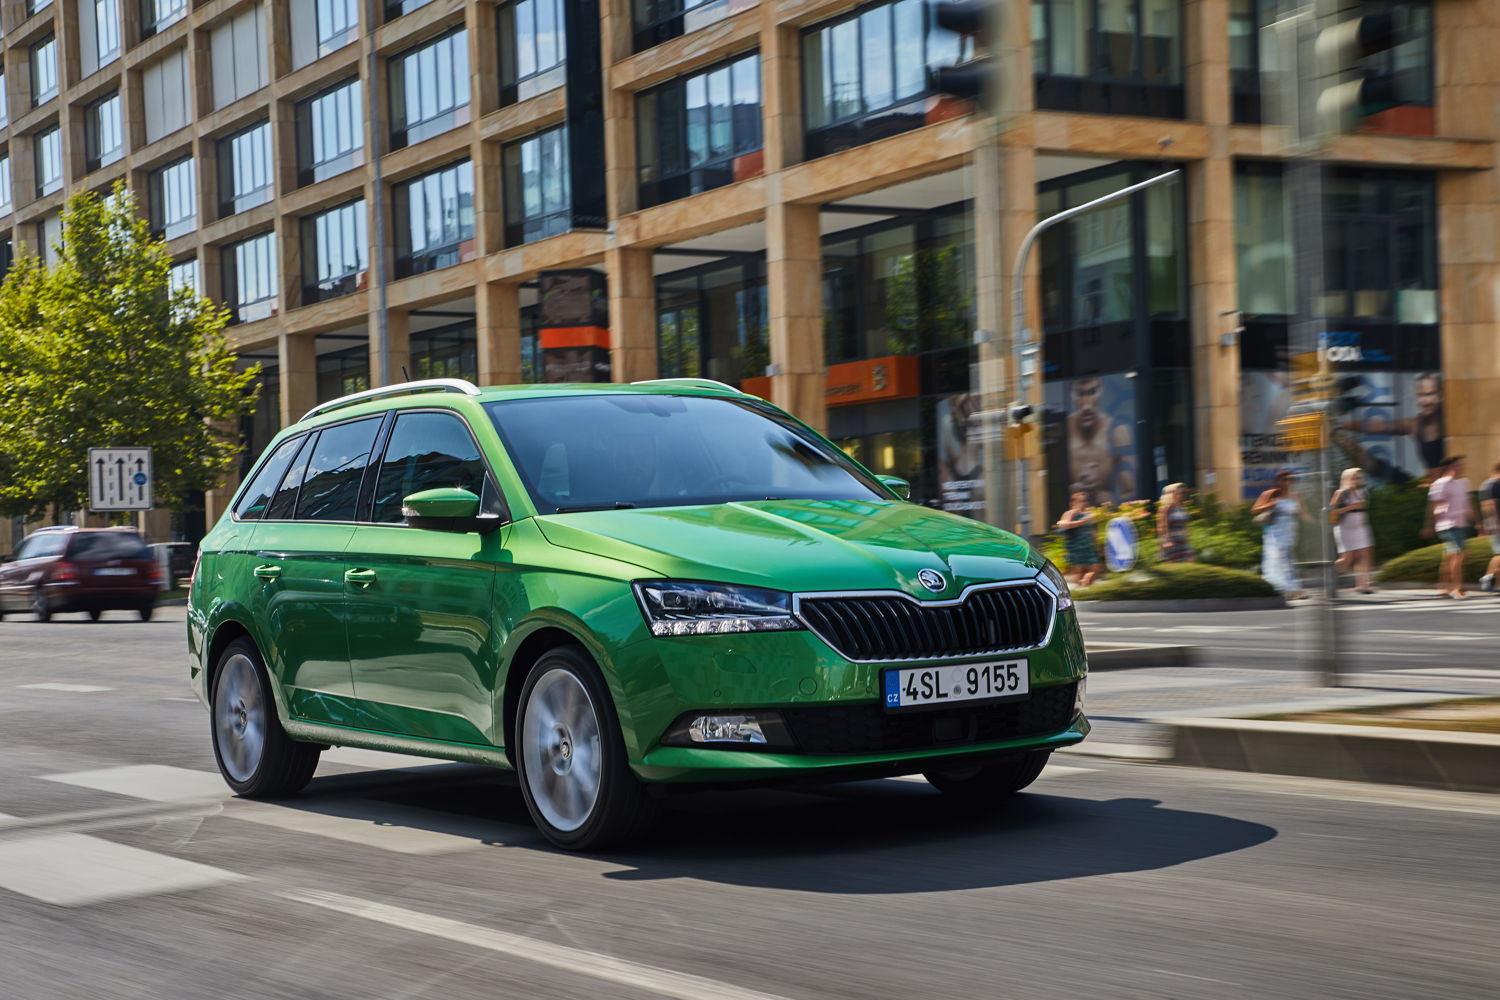 Design and technology update for the ŠKODA FABIA in
2018 – four years after the introduction of the third
generation, ŠKODA extensively modernises its popular
small car. 
